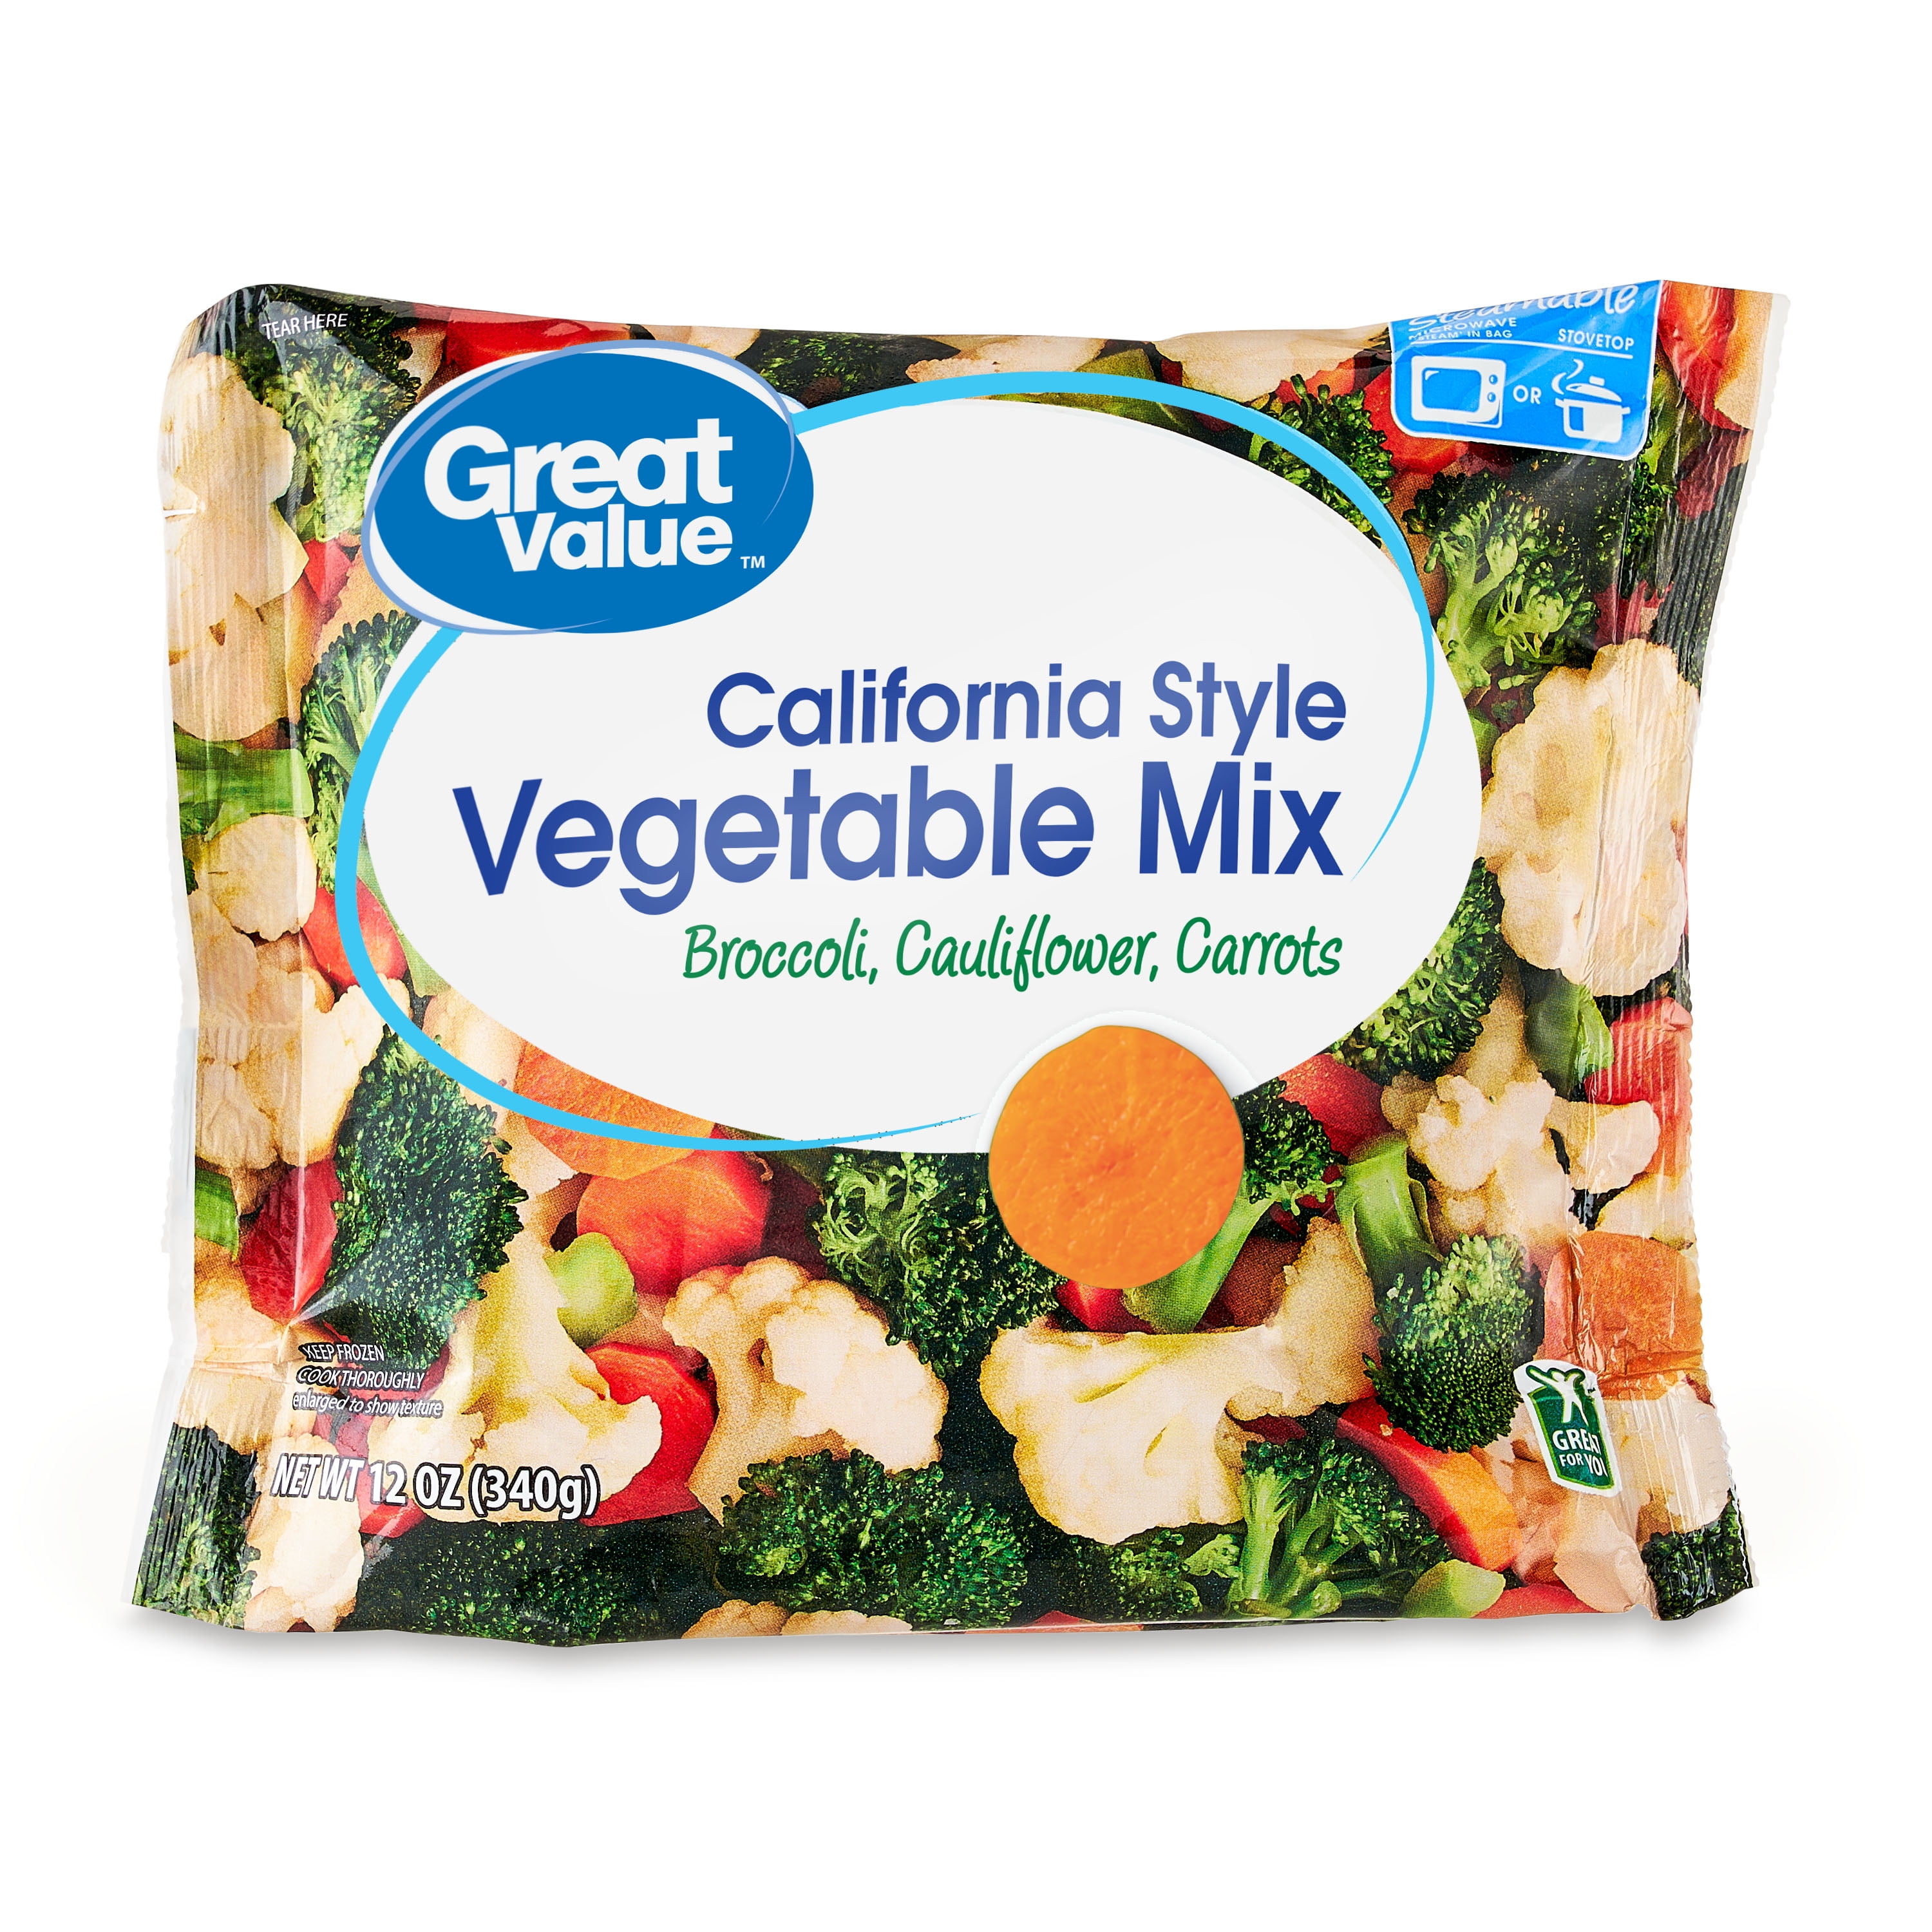 Great Value California Style Vegetable Mix 12 oz Bag Frozen b7e0a76c be24 4779 b83c 018f45cf5605.44bc144cda2206c39ae17721b82e9c9b